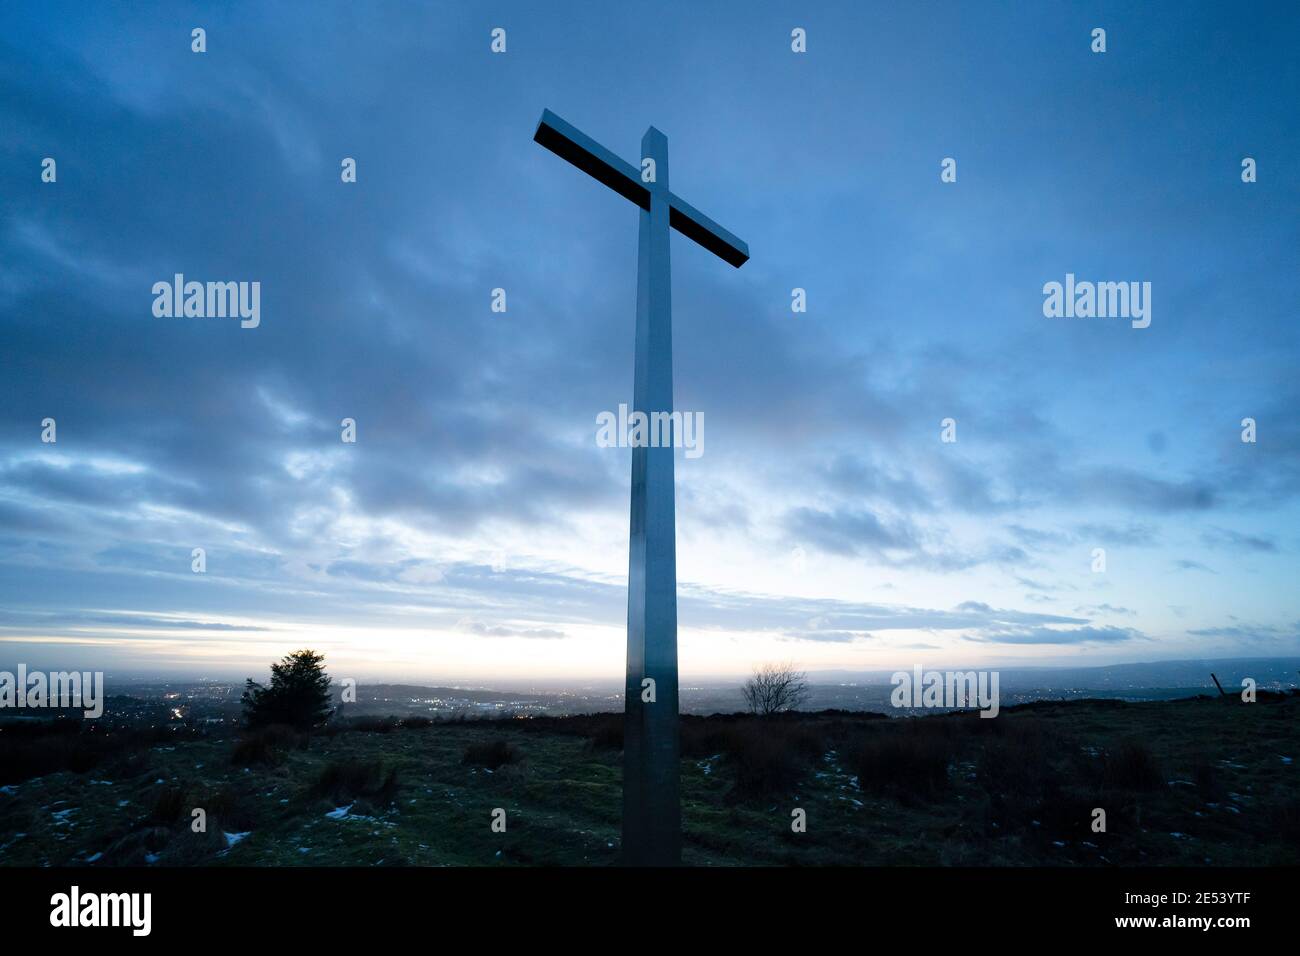 Manchester, UK, 25th Jan 2021. A cross erected by local residents to mark the millennium stands is the the hills above Oldham near Manchester as the country approaches 100,000 Covid-19 deaths in the face of the Coronavirus, Manchester, UK. Credit: Jon Super/Alamy Live News. Stock Photo